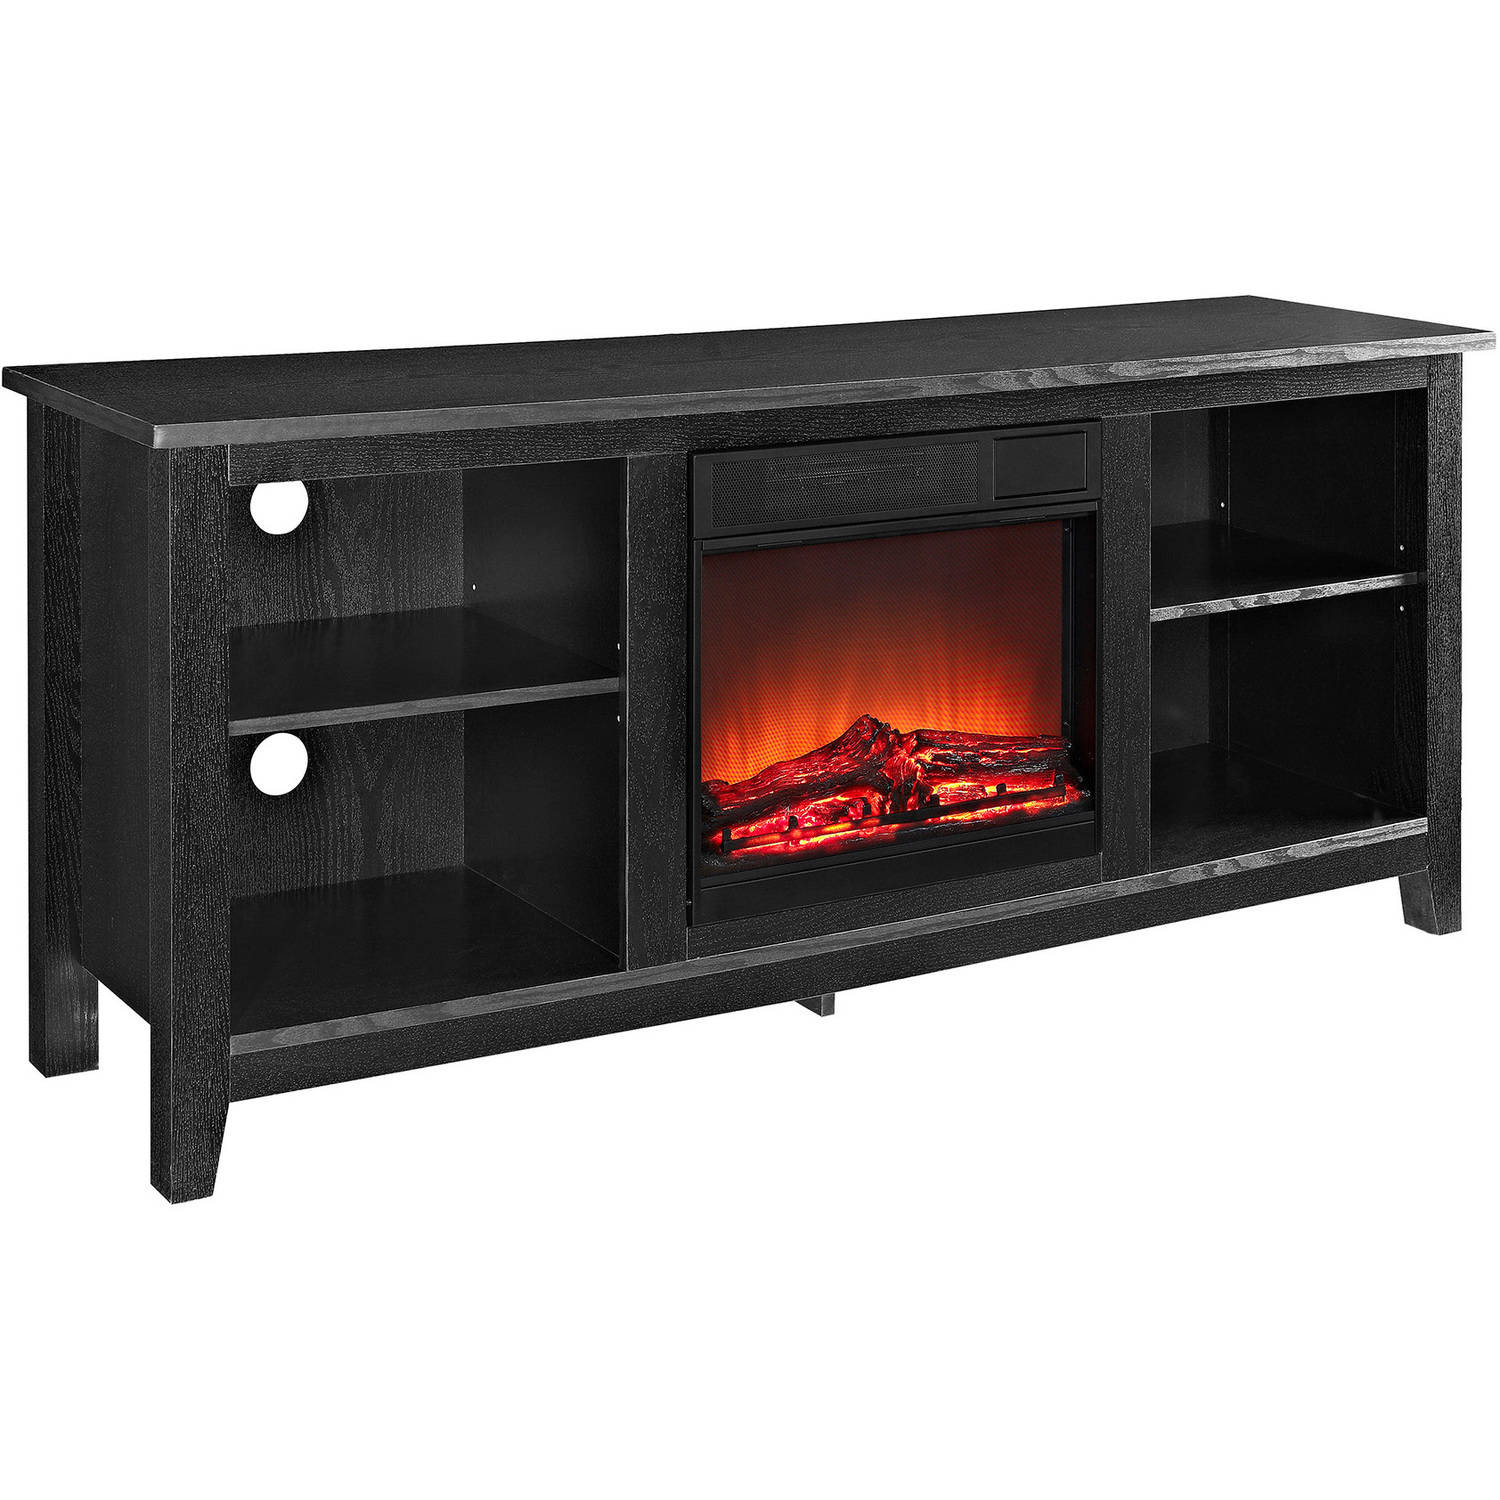 Walker Edison Traditional Fireplace TV Stand for TVs Up to 64" - Black - image 3 of 9